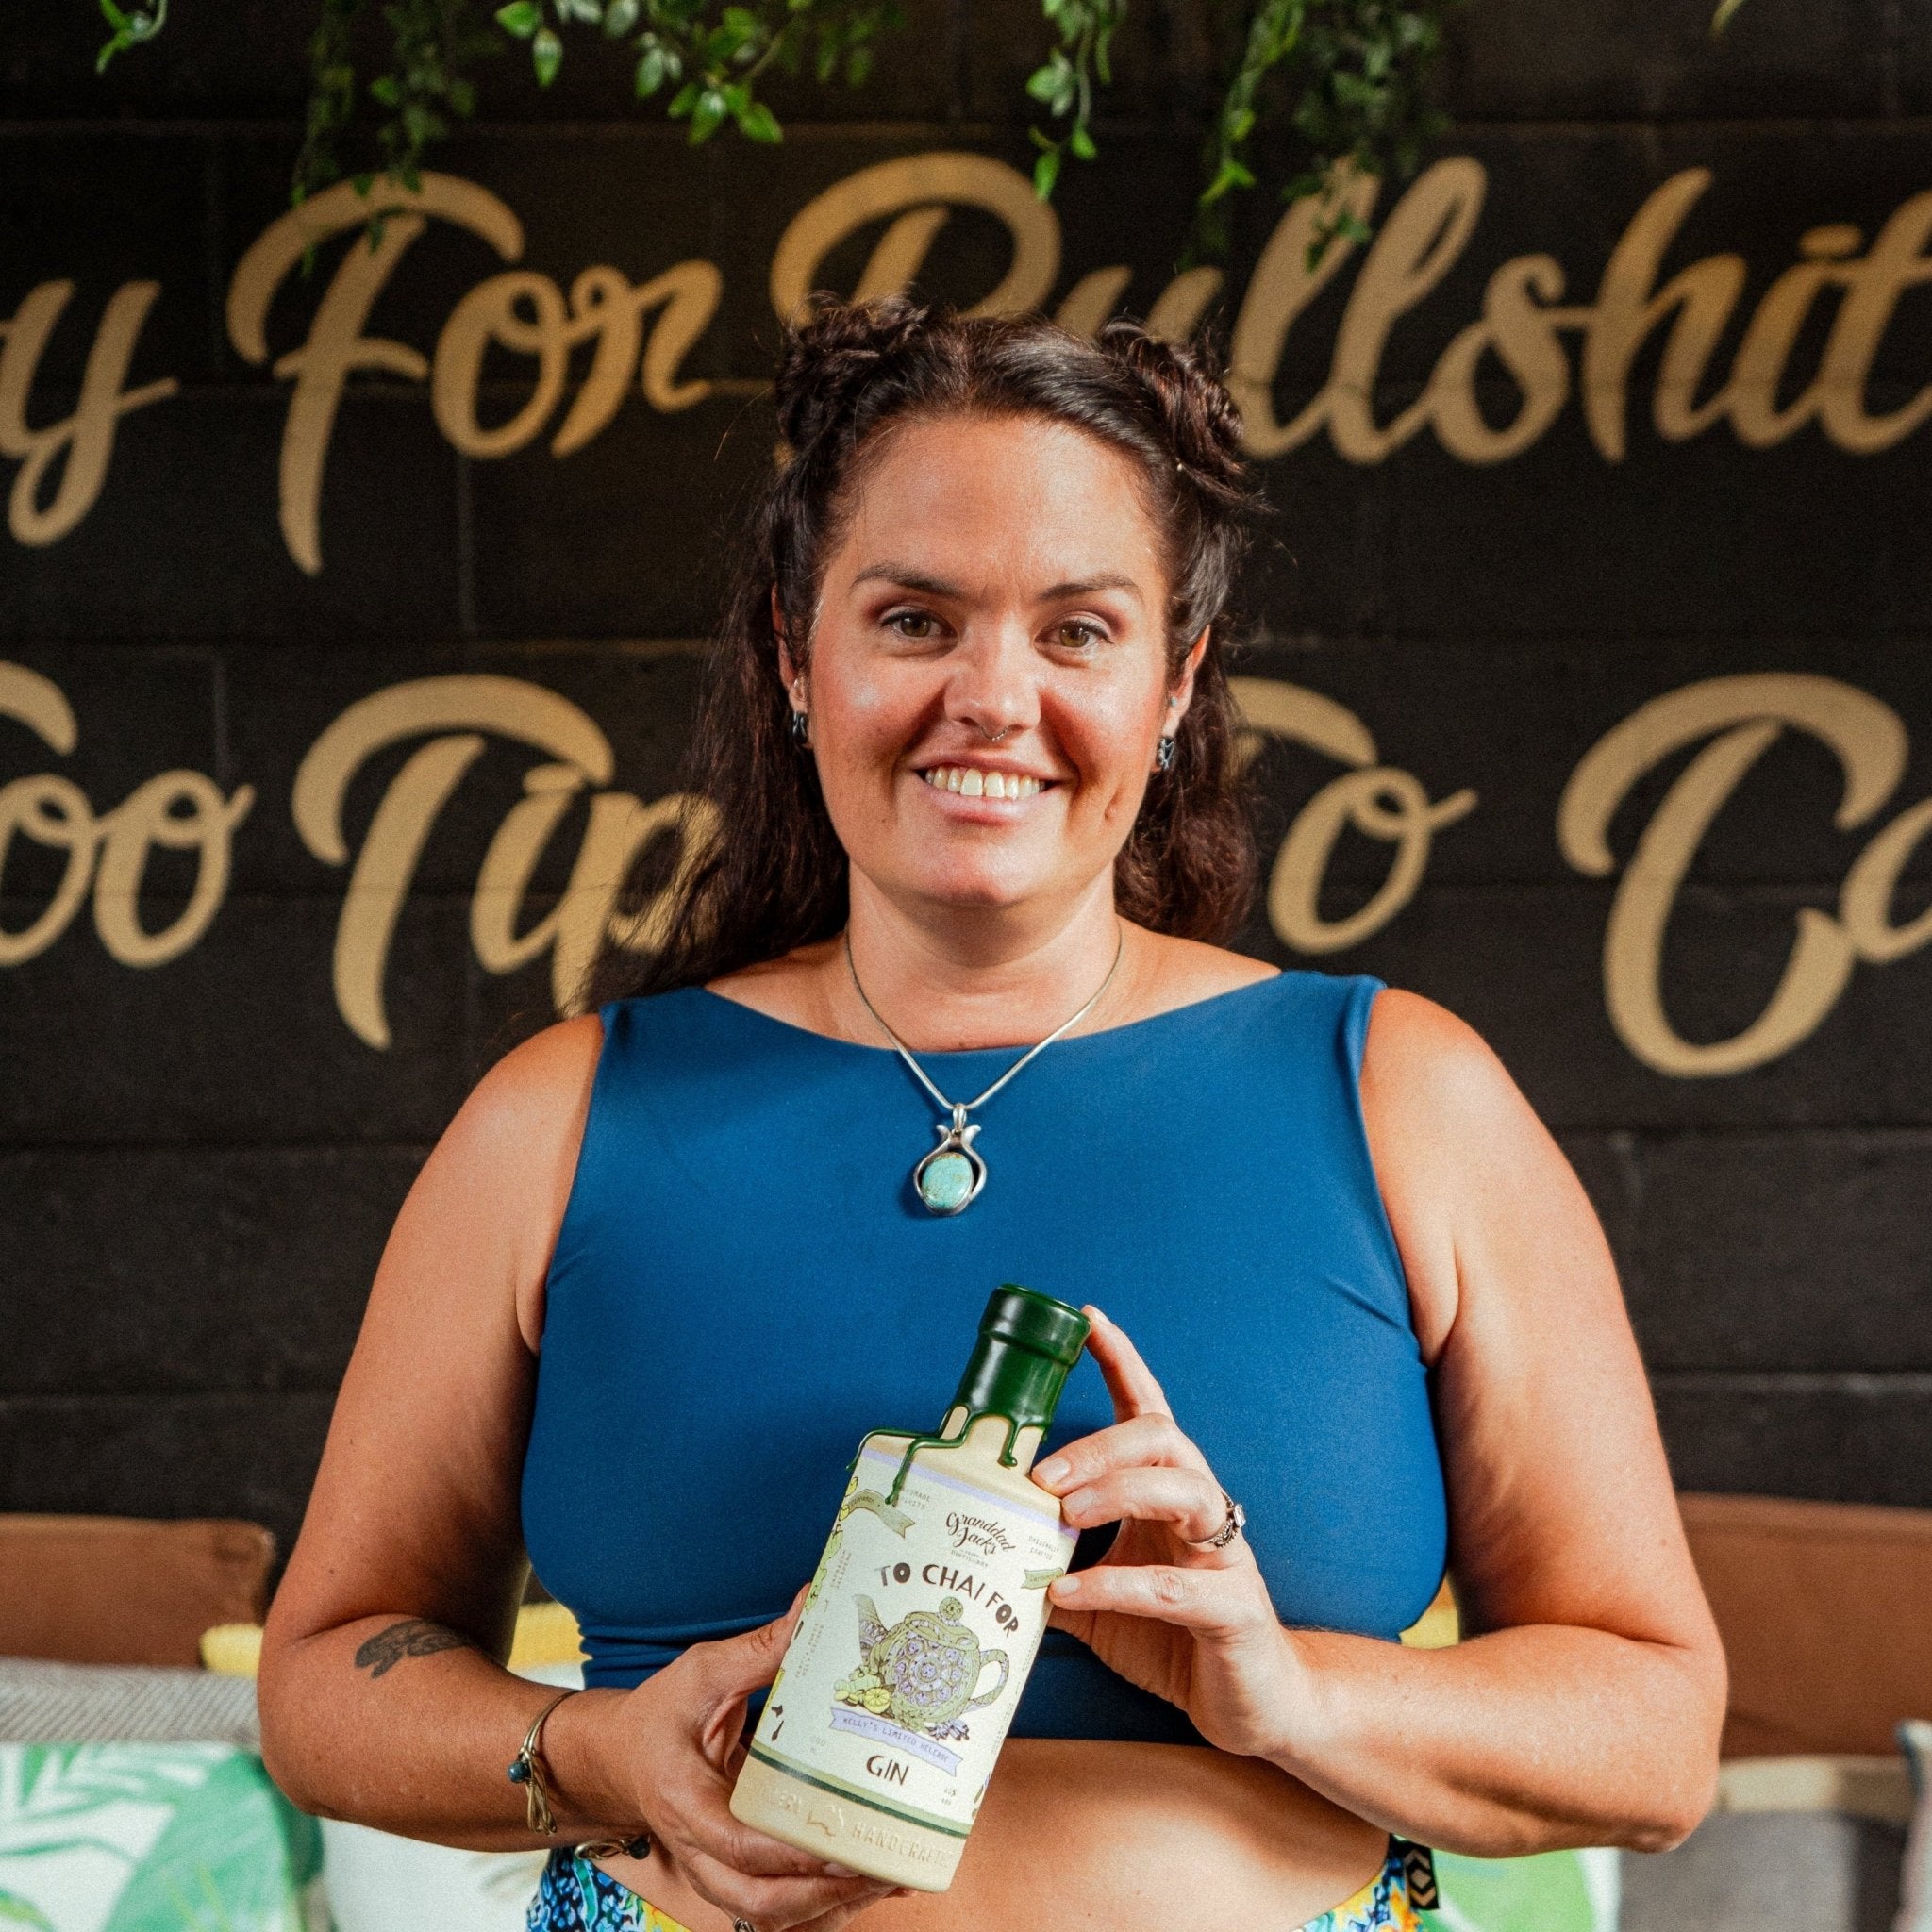 Kelly's To Chai For Gin - Granddad Jack's Craft Distillery